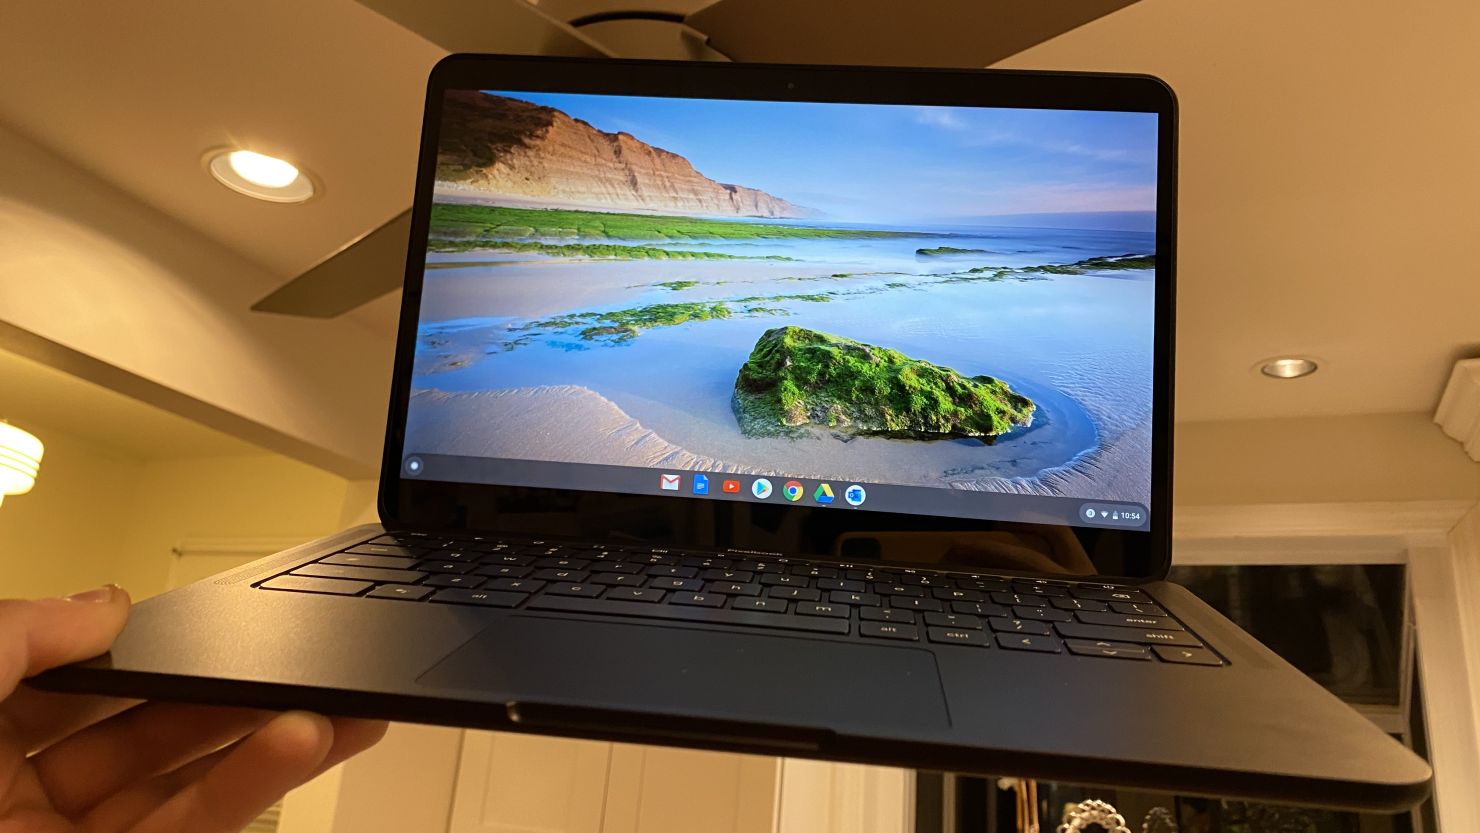 Google Chromebook Pixel (2015) review: Once a worthy Windows alternative,  now replaced with the Pixelbook